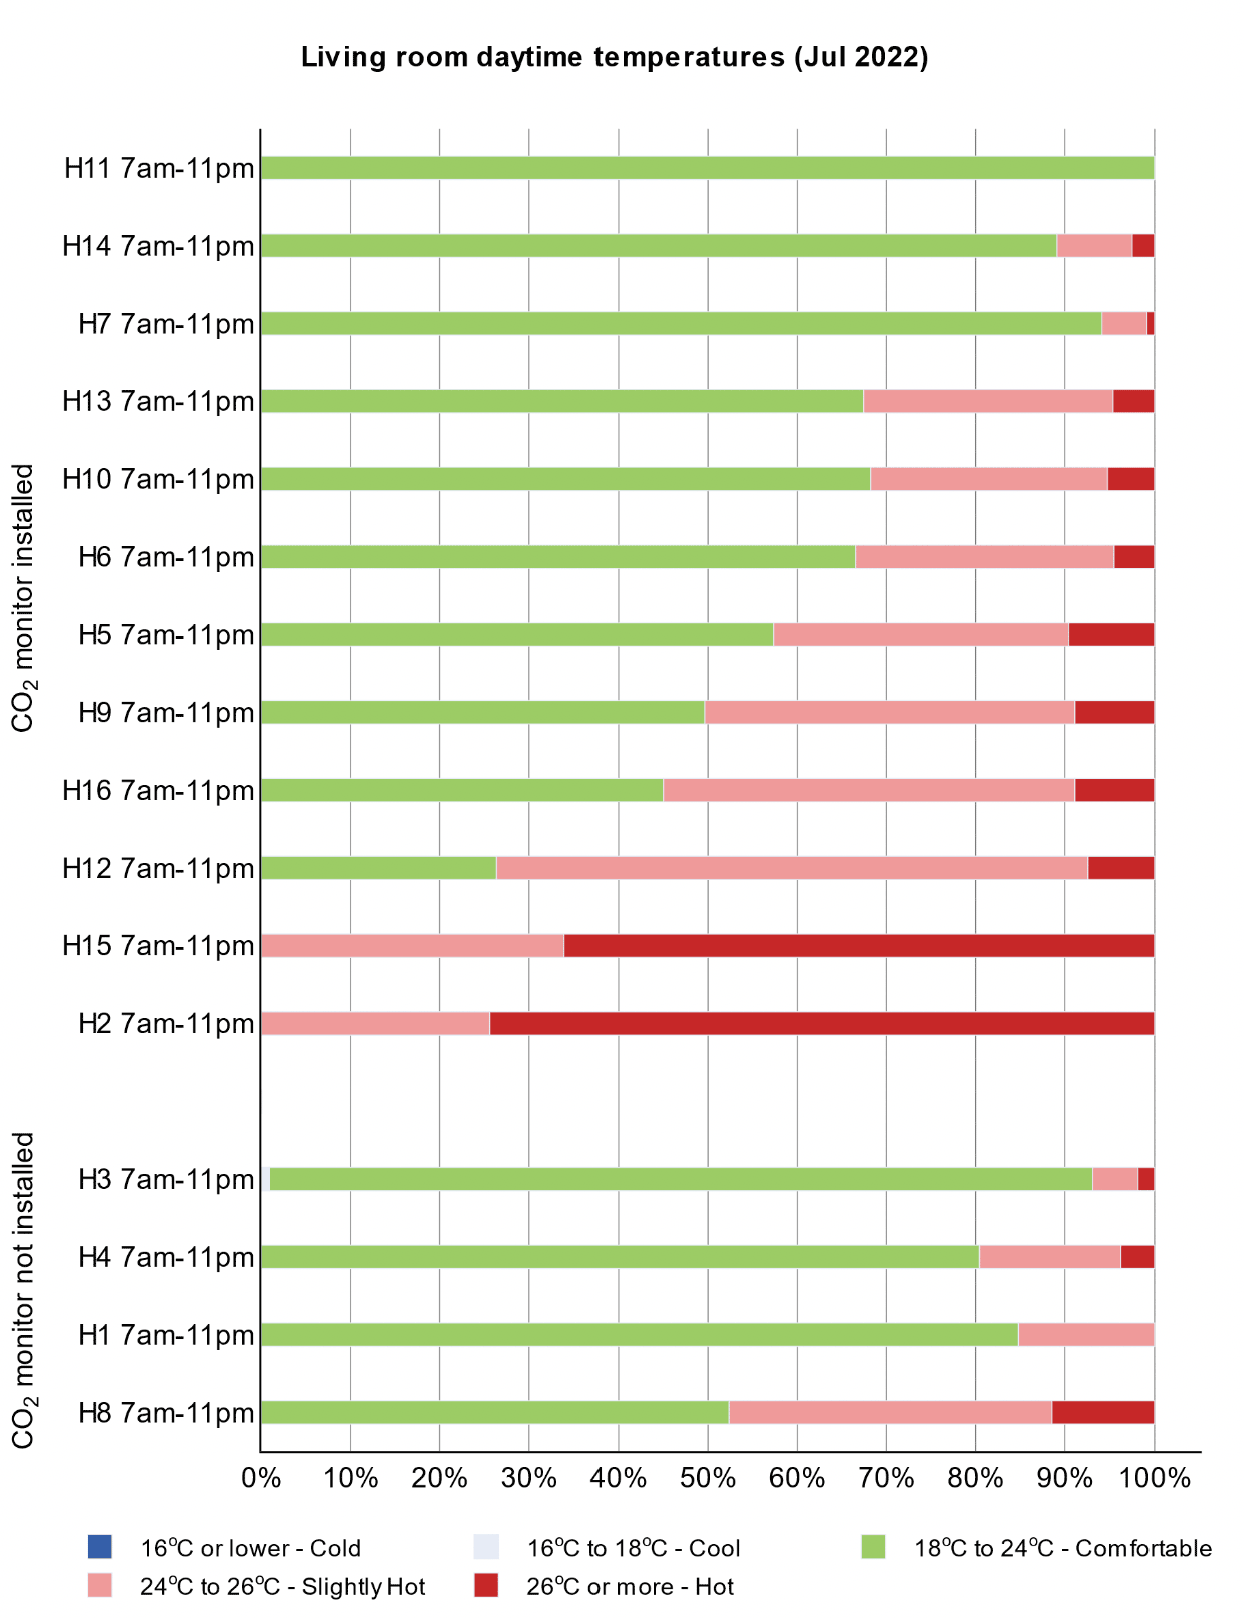 Bar chart indicating daytime Summer temperatures in living rooms.